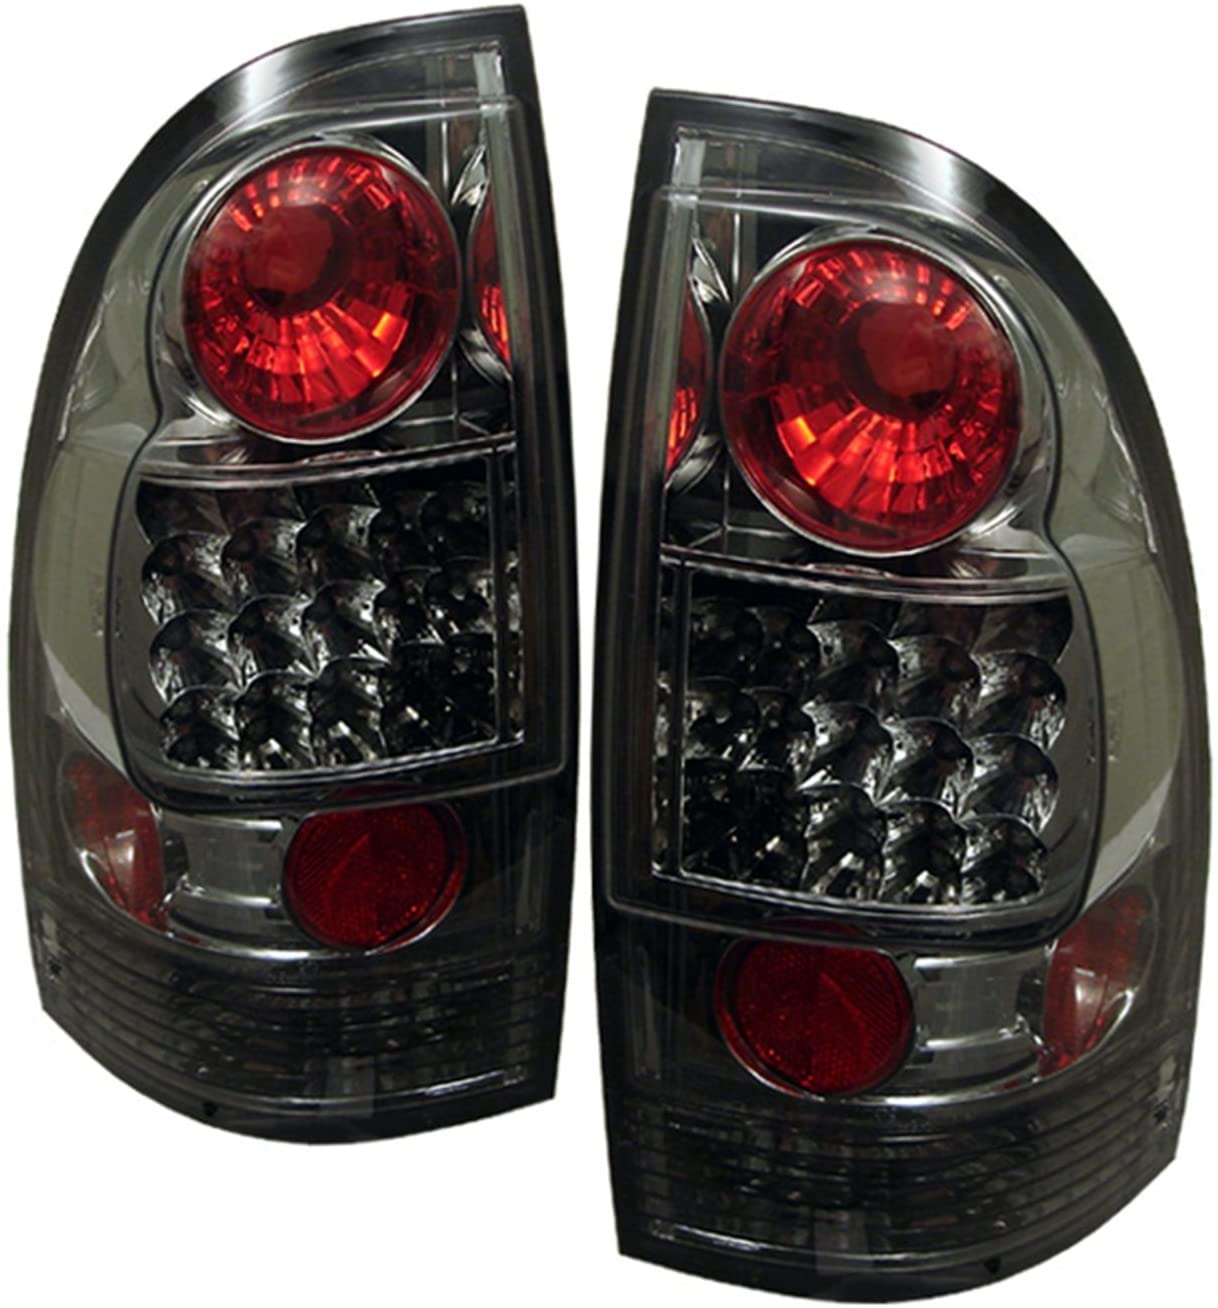 Spyder 5007919 Toyota Tacoma 05-15 LED Tail Lights (not compatible with factory equipped led tail lights) - Signal-3157(Not Included) ; Parking-LED ; Reverse-921(Not Included) - Black (Smoke)